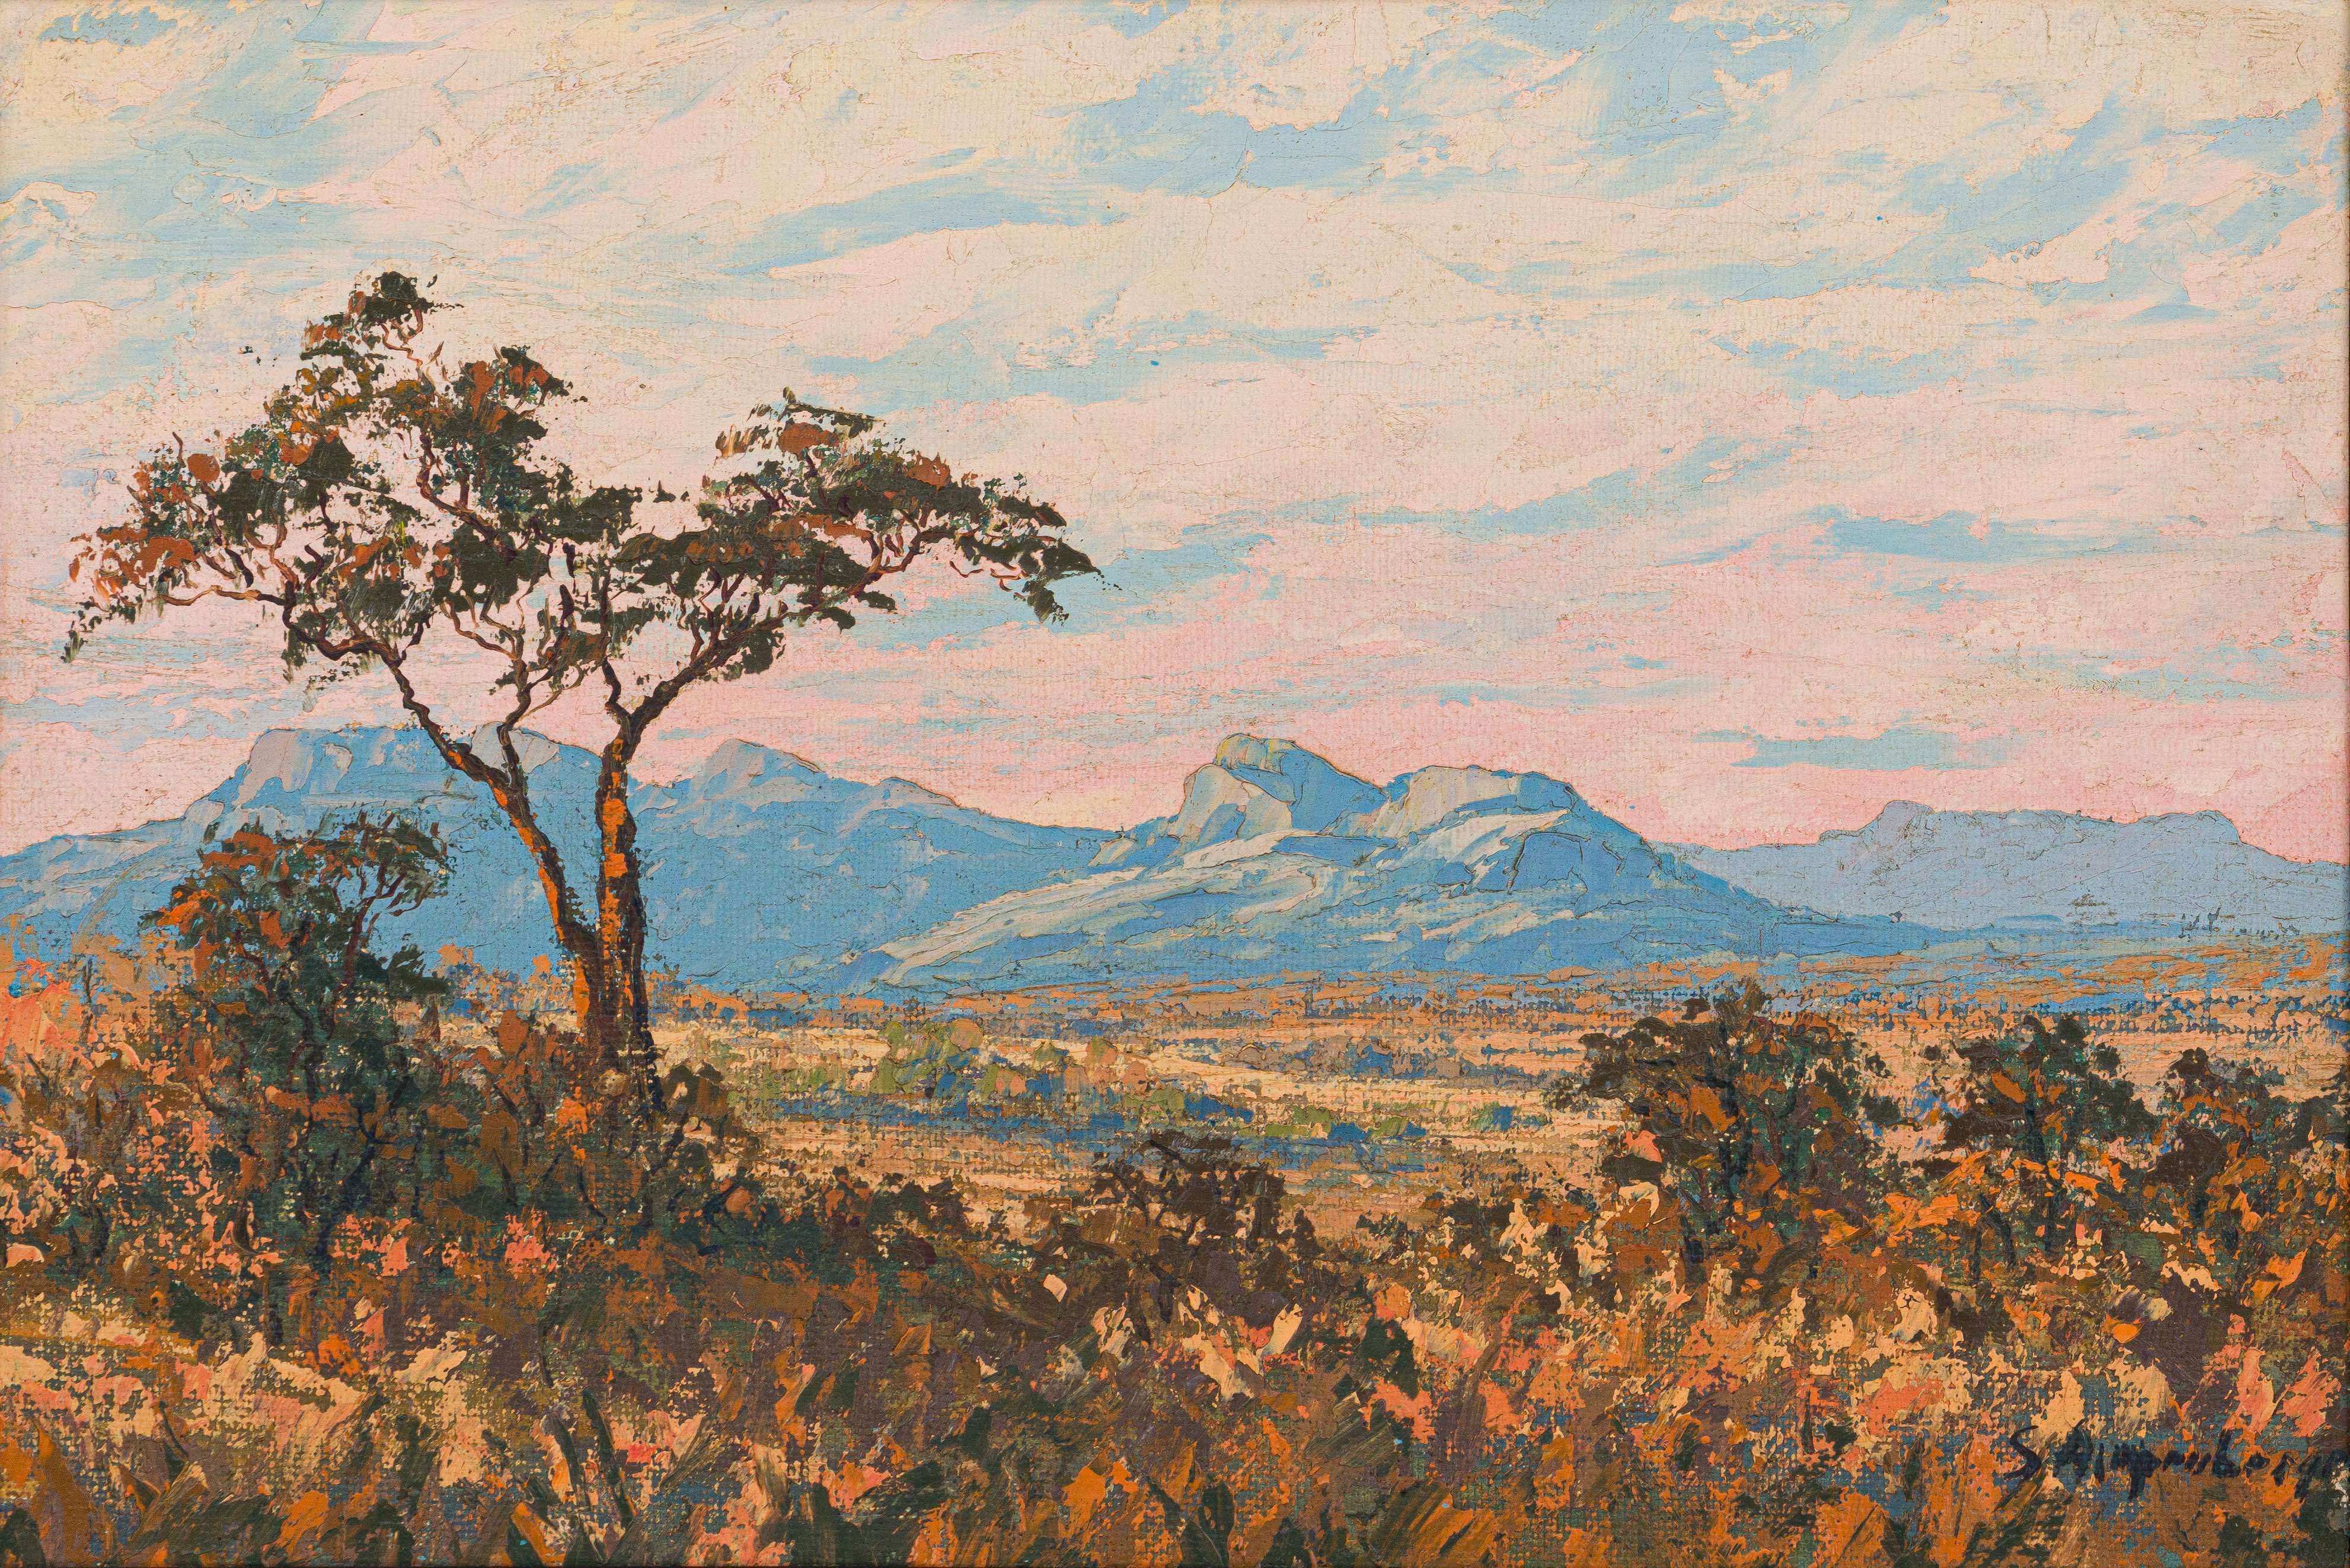 Artwork by Stefan Ampenberger, Landscape with Distant Mountains, Made of oil on canvas